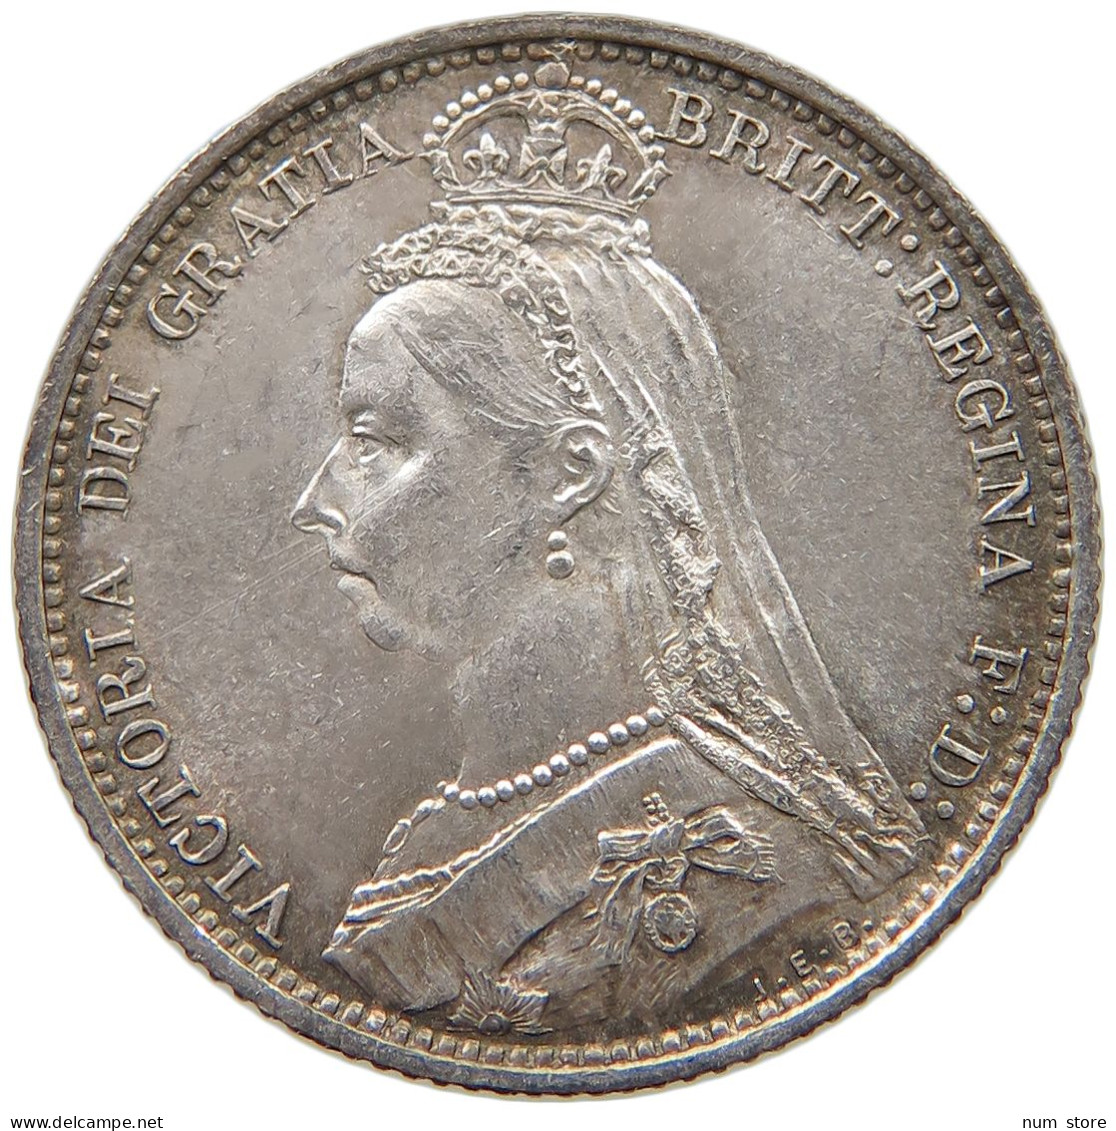 GREAT BRITAIN SIXPENCE 1887 Victoria 1837-1901 #t139 0229 - H. 6 Pence